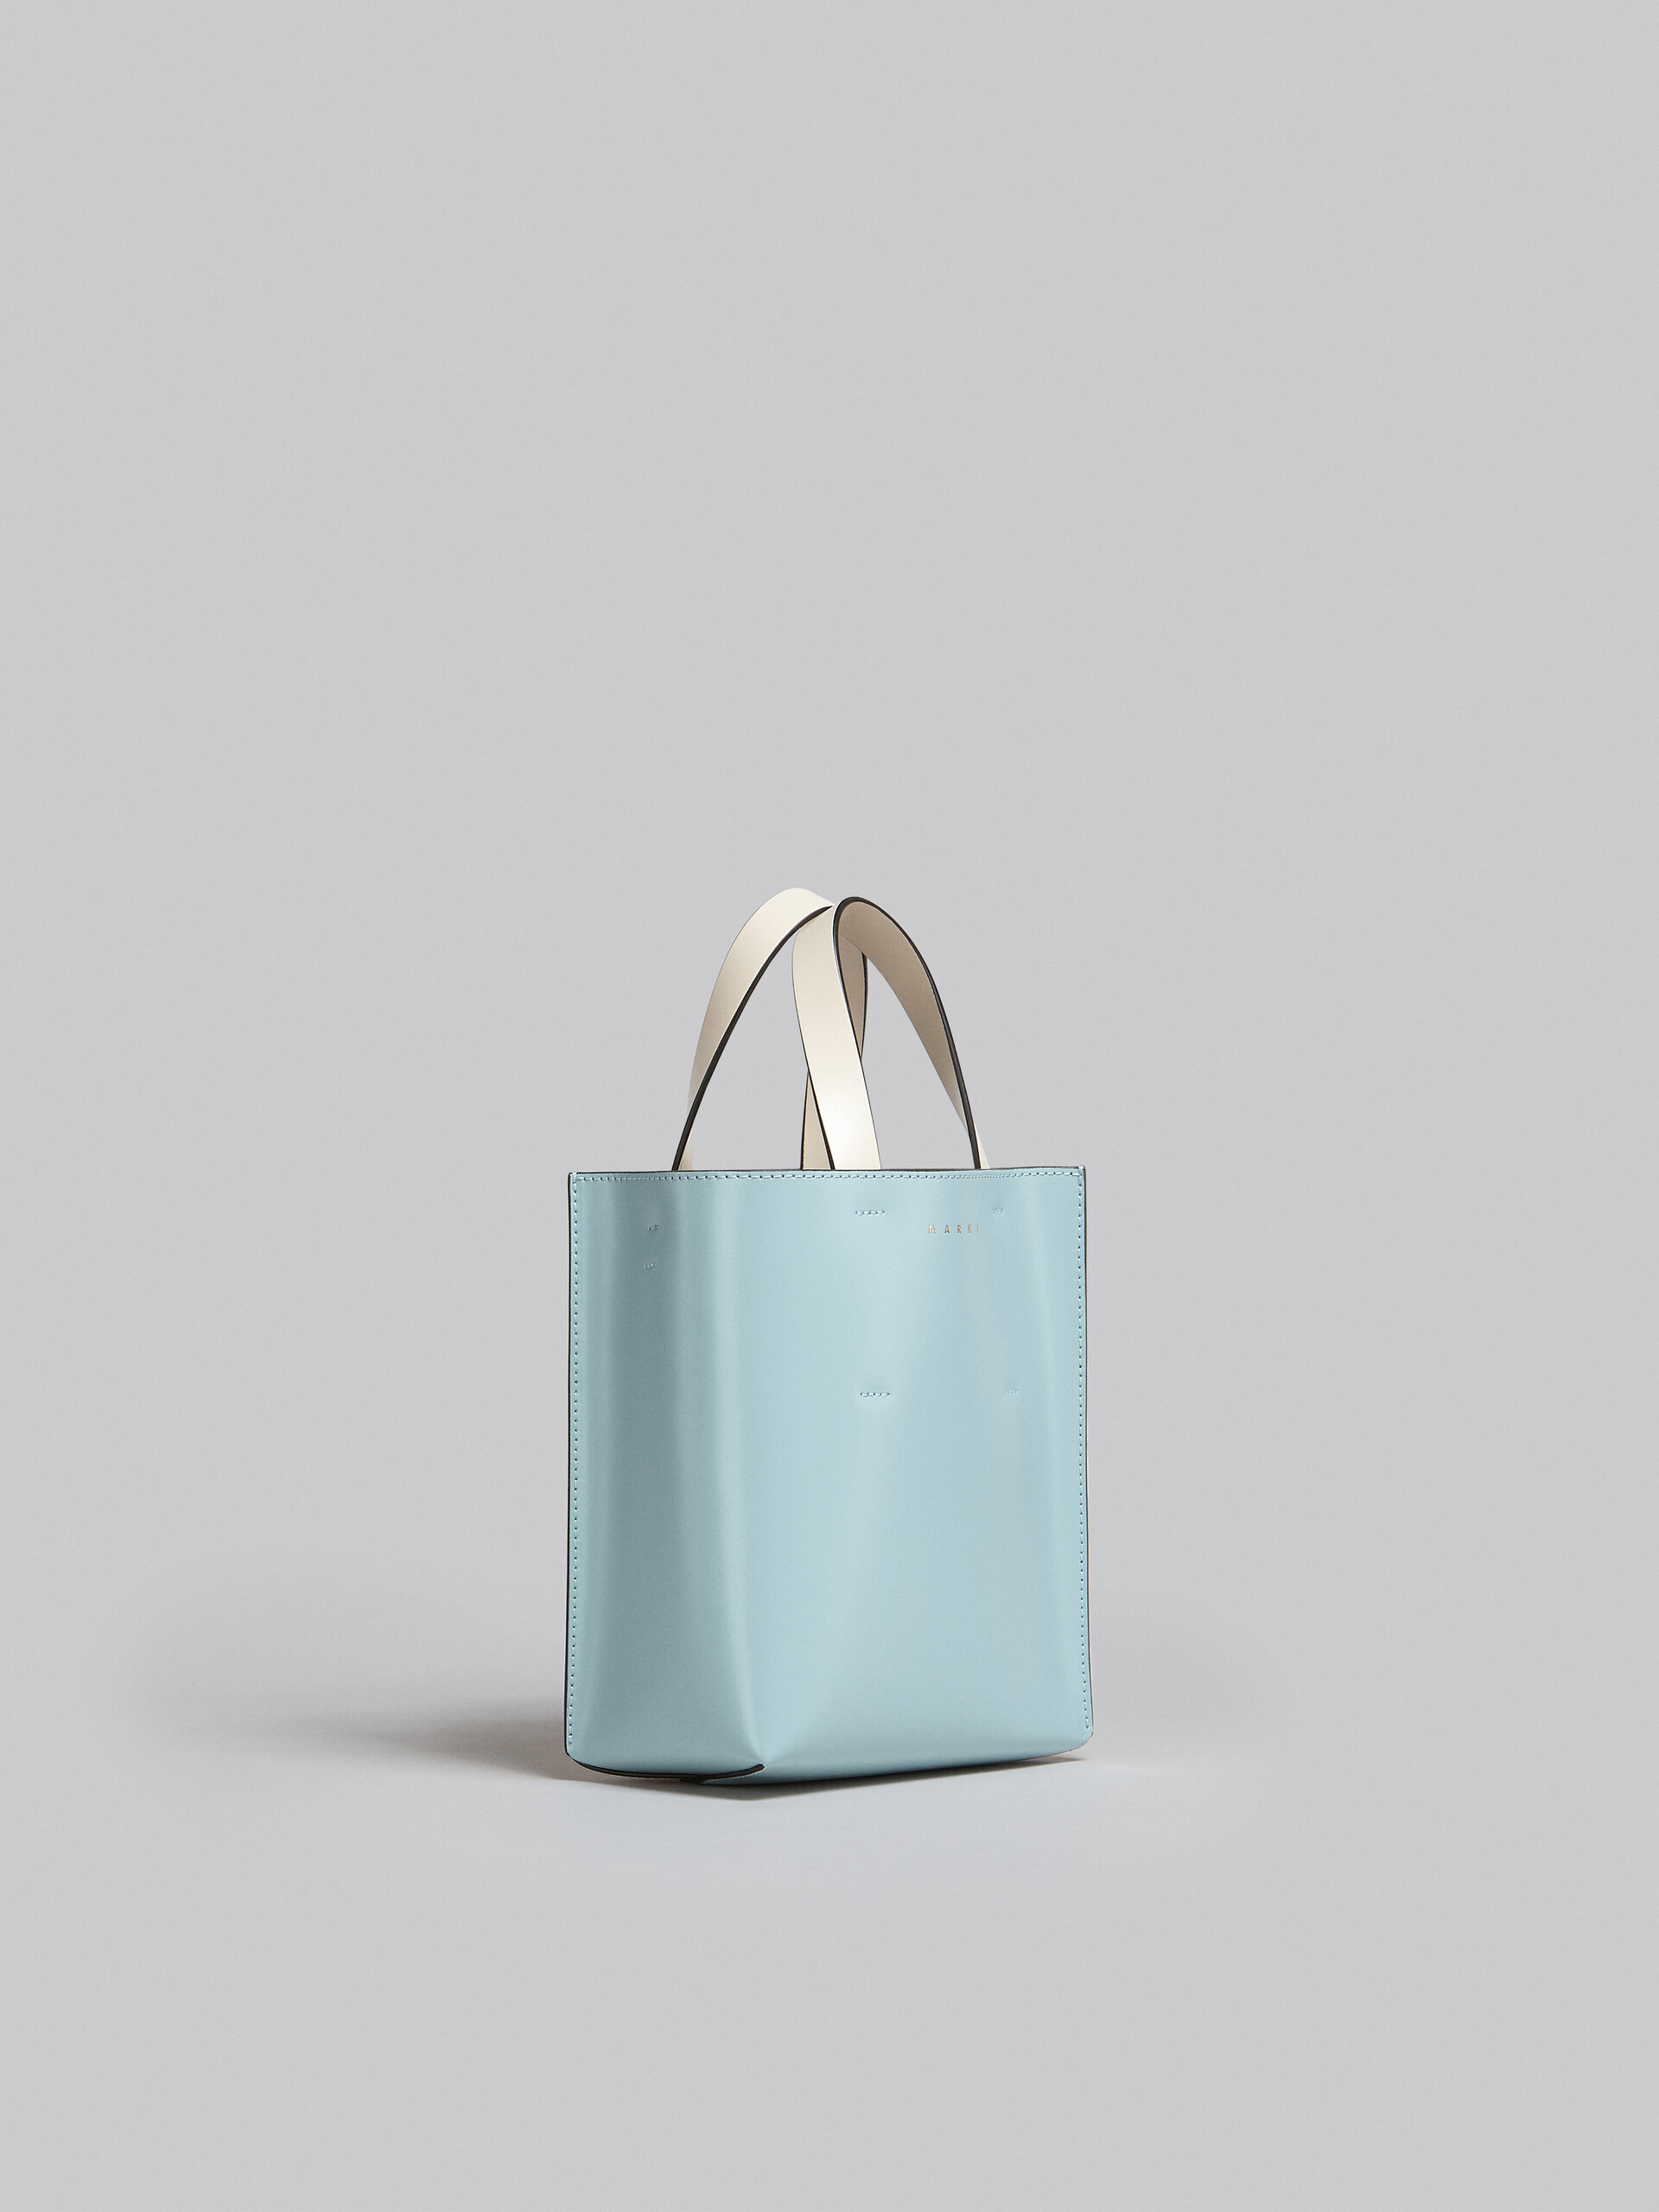 Museo Soft Mini Bag in white light blue and orange leather